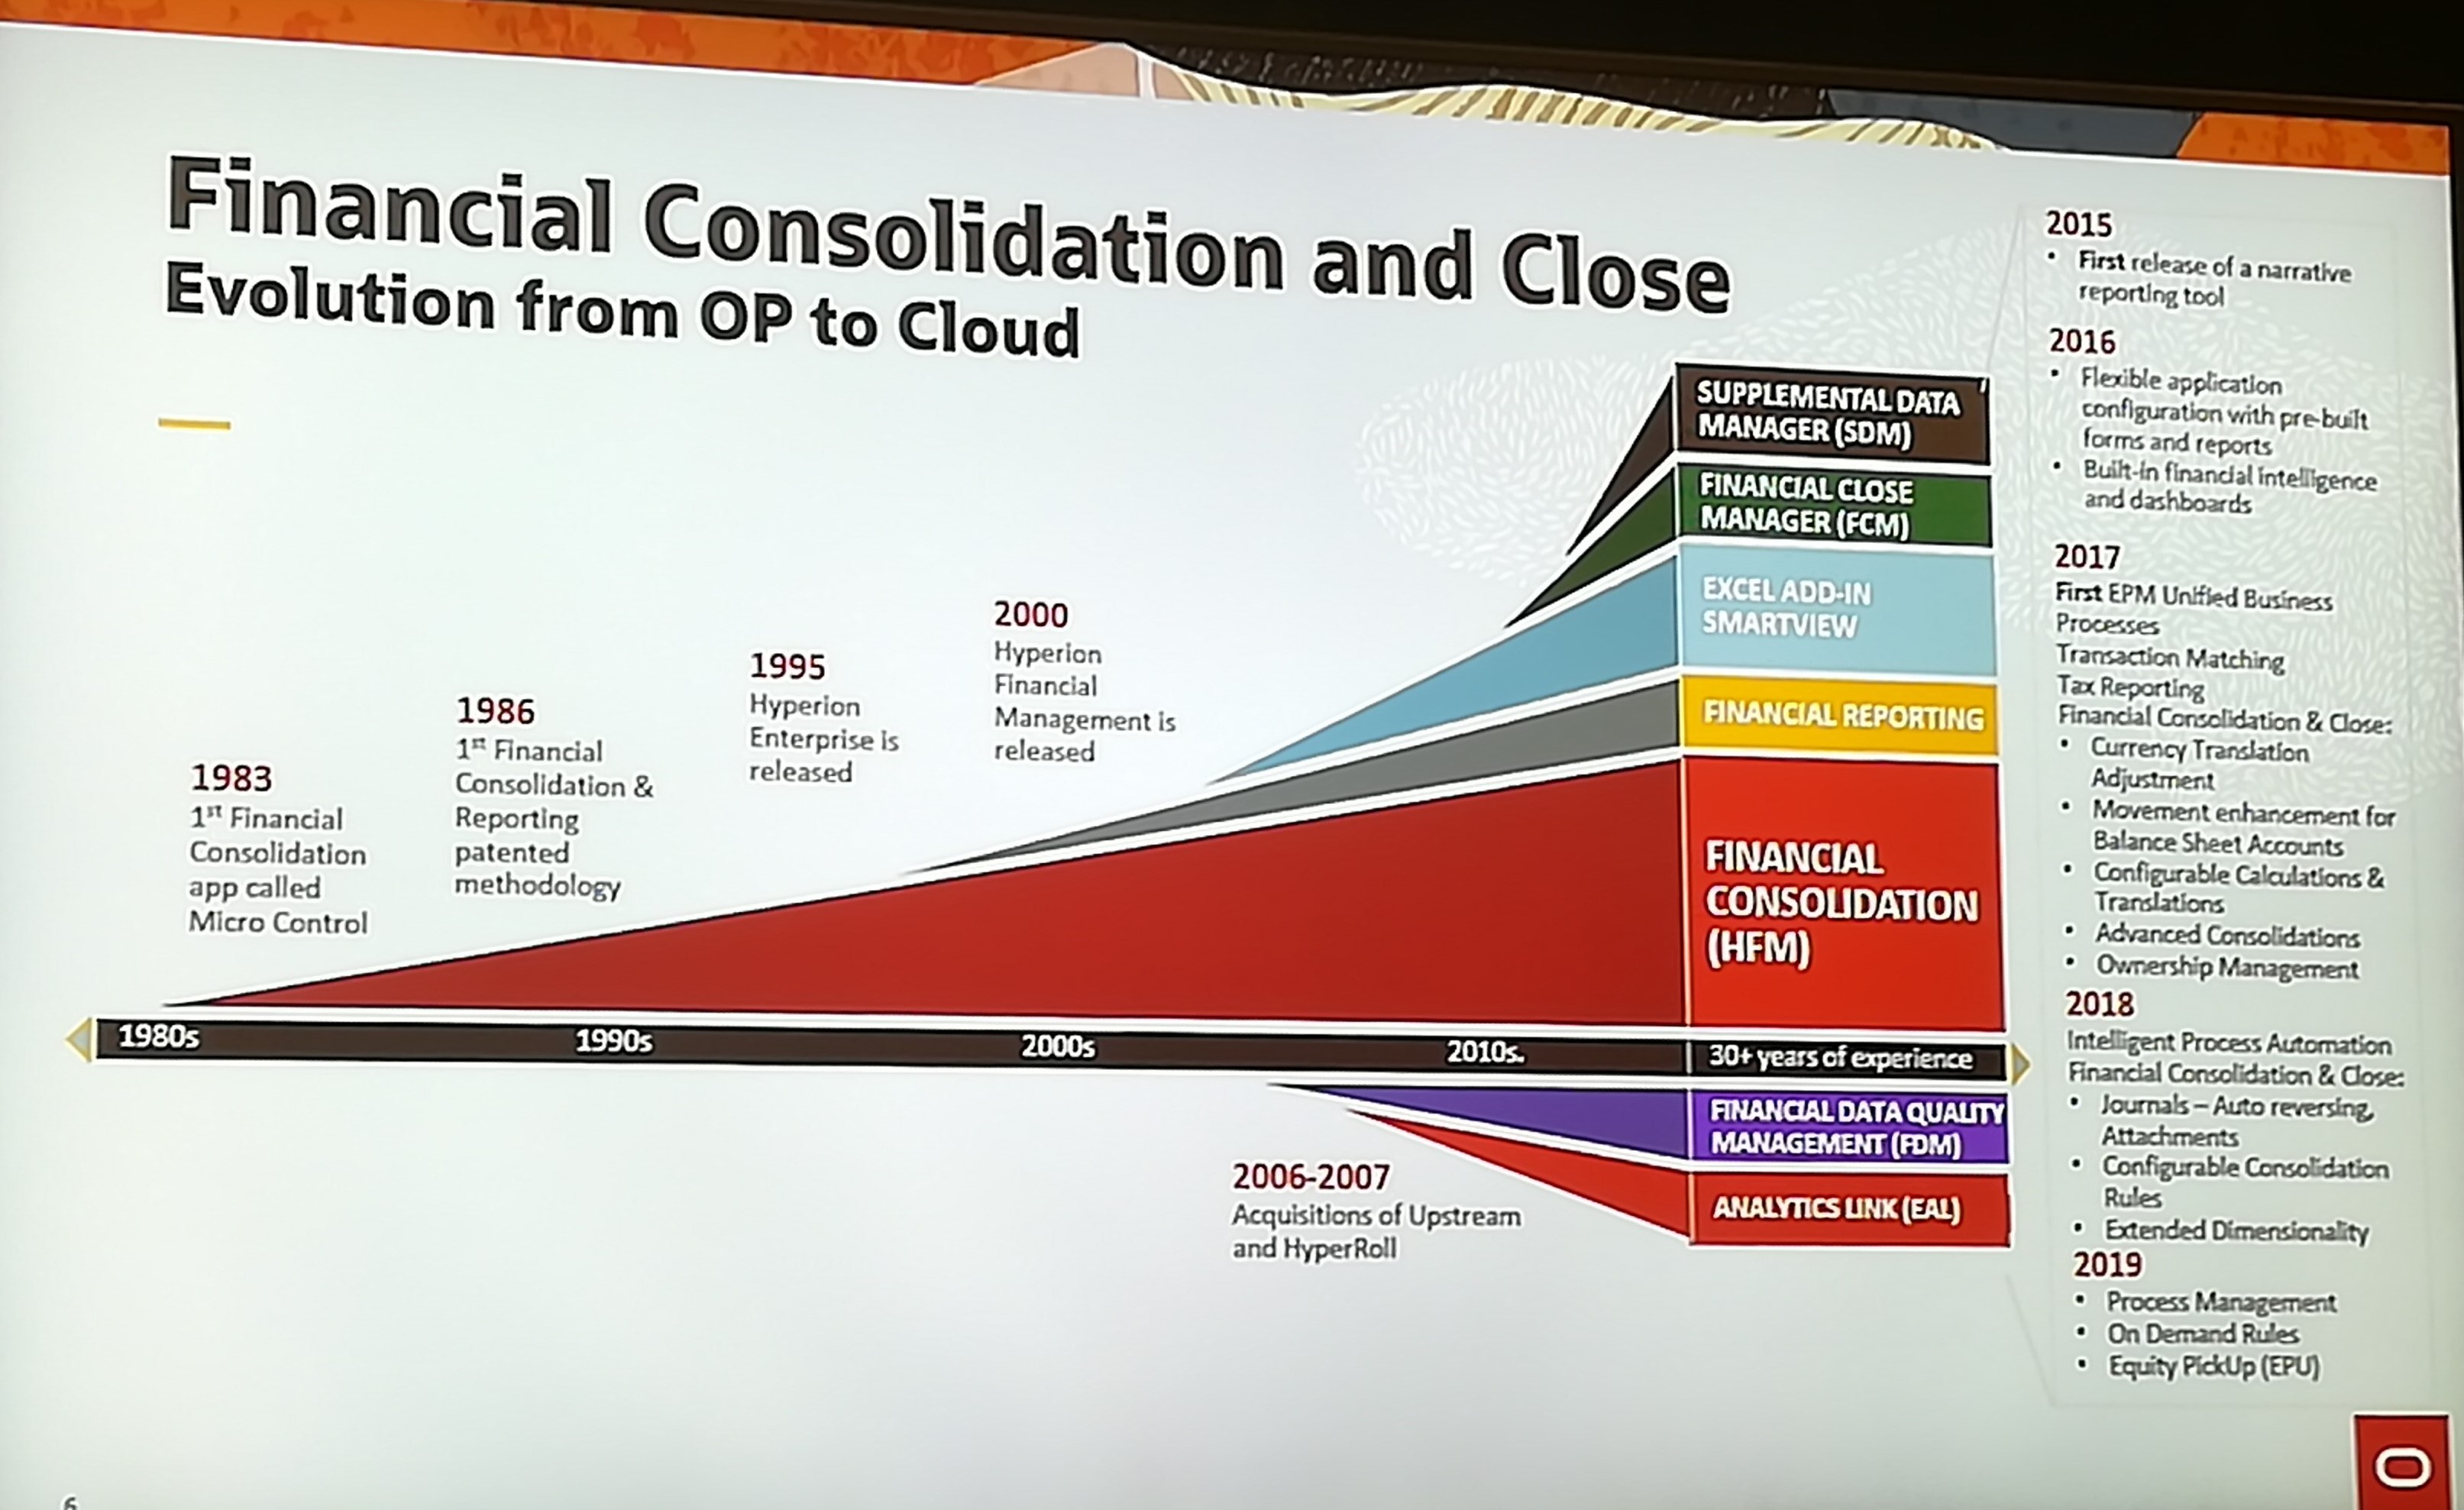 Oracle Open World 2019 - Financial consolidation and close